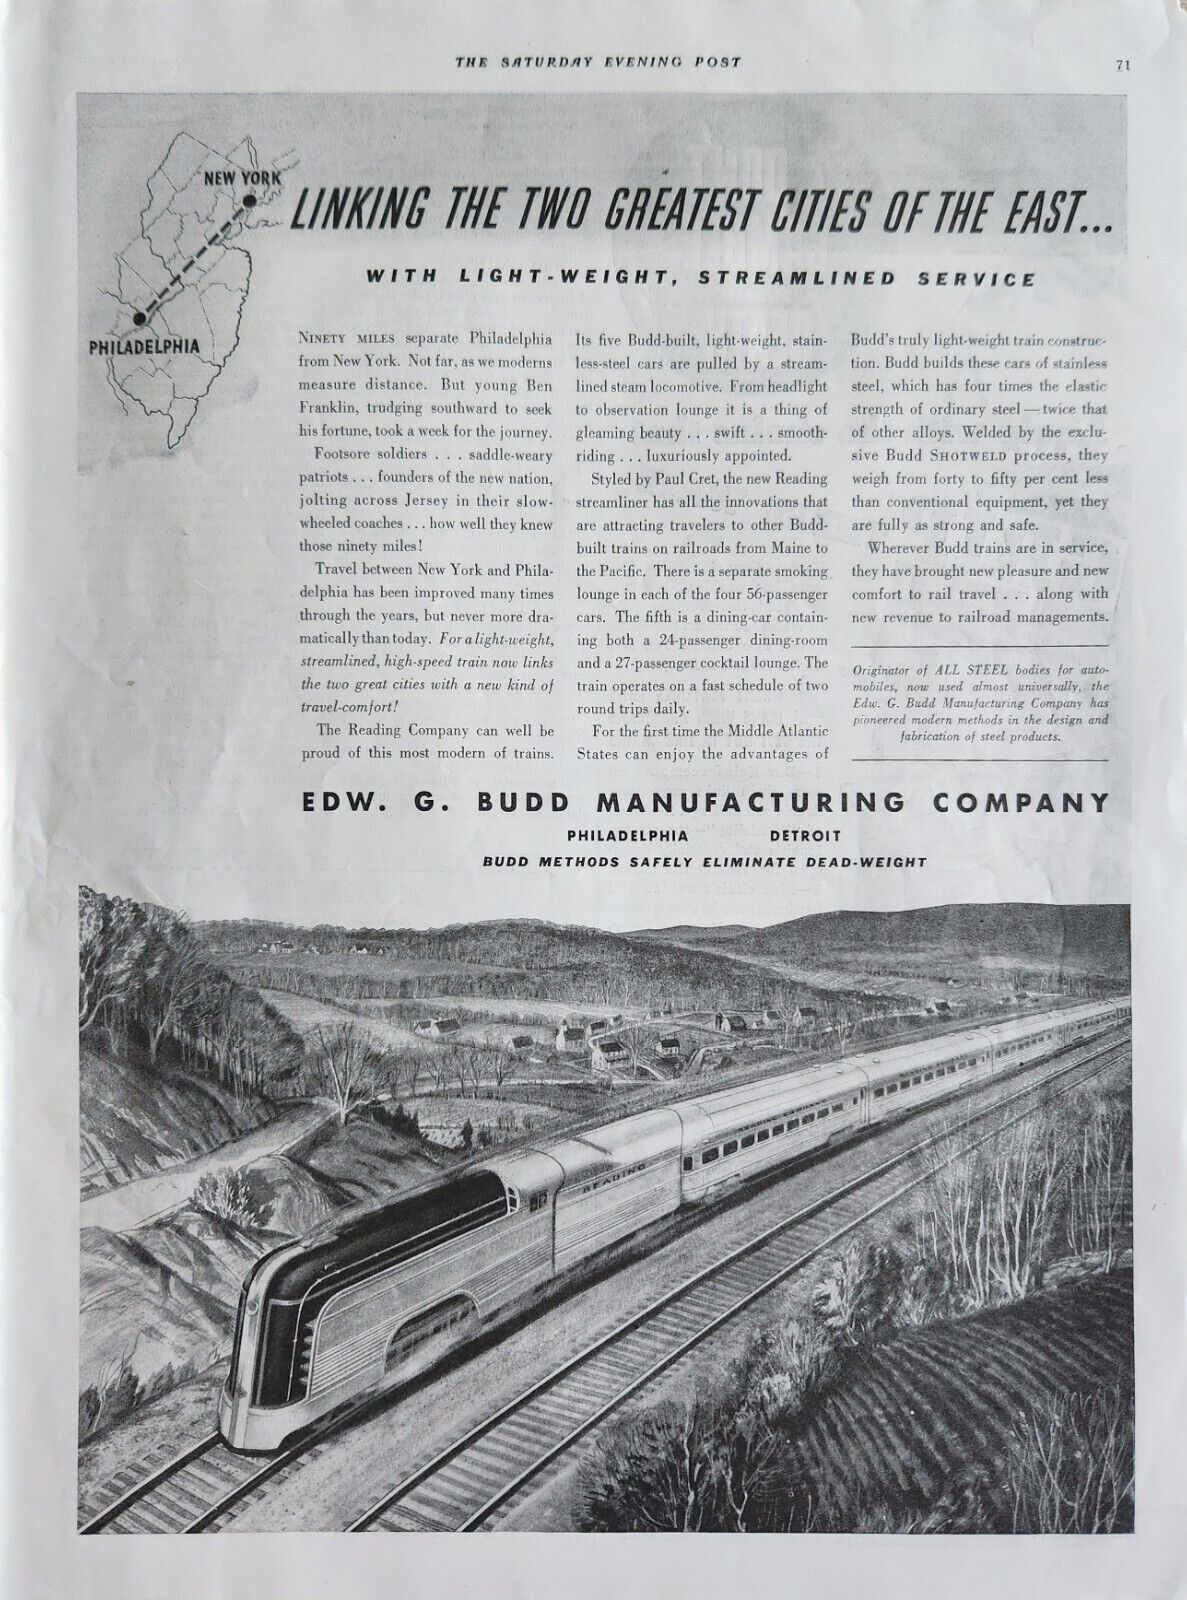 1937 Edw G Budd Manufacturing Company Vintage Ad two greatest cities